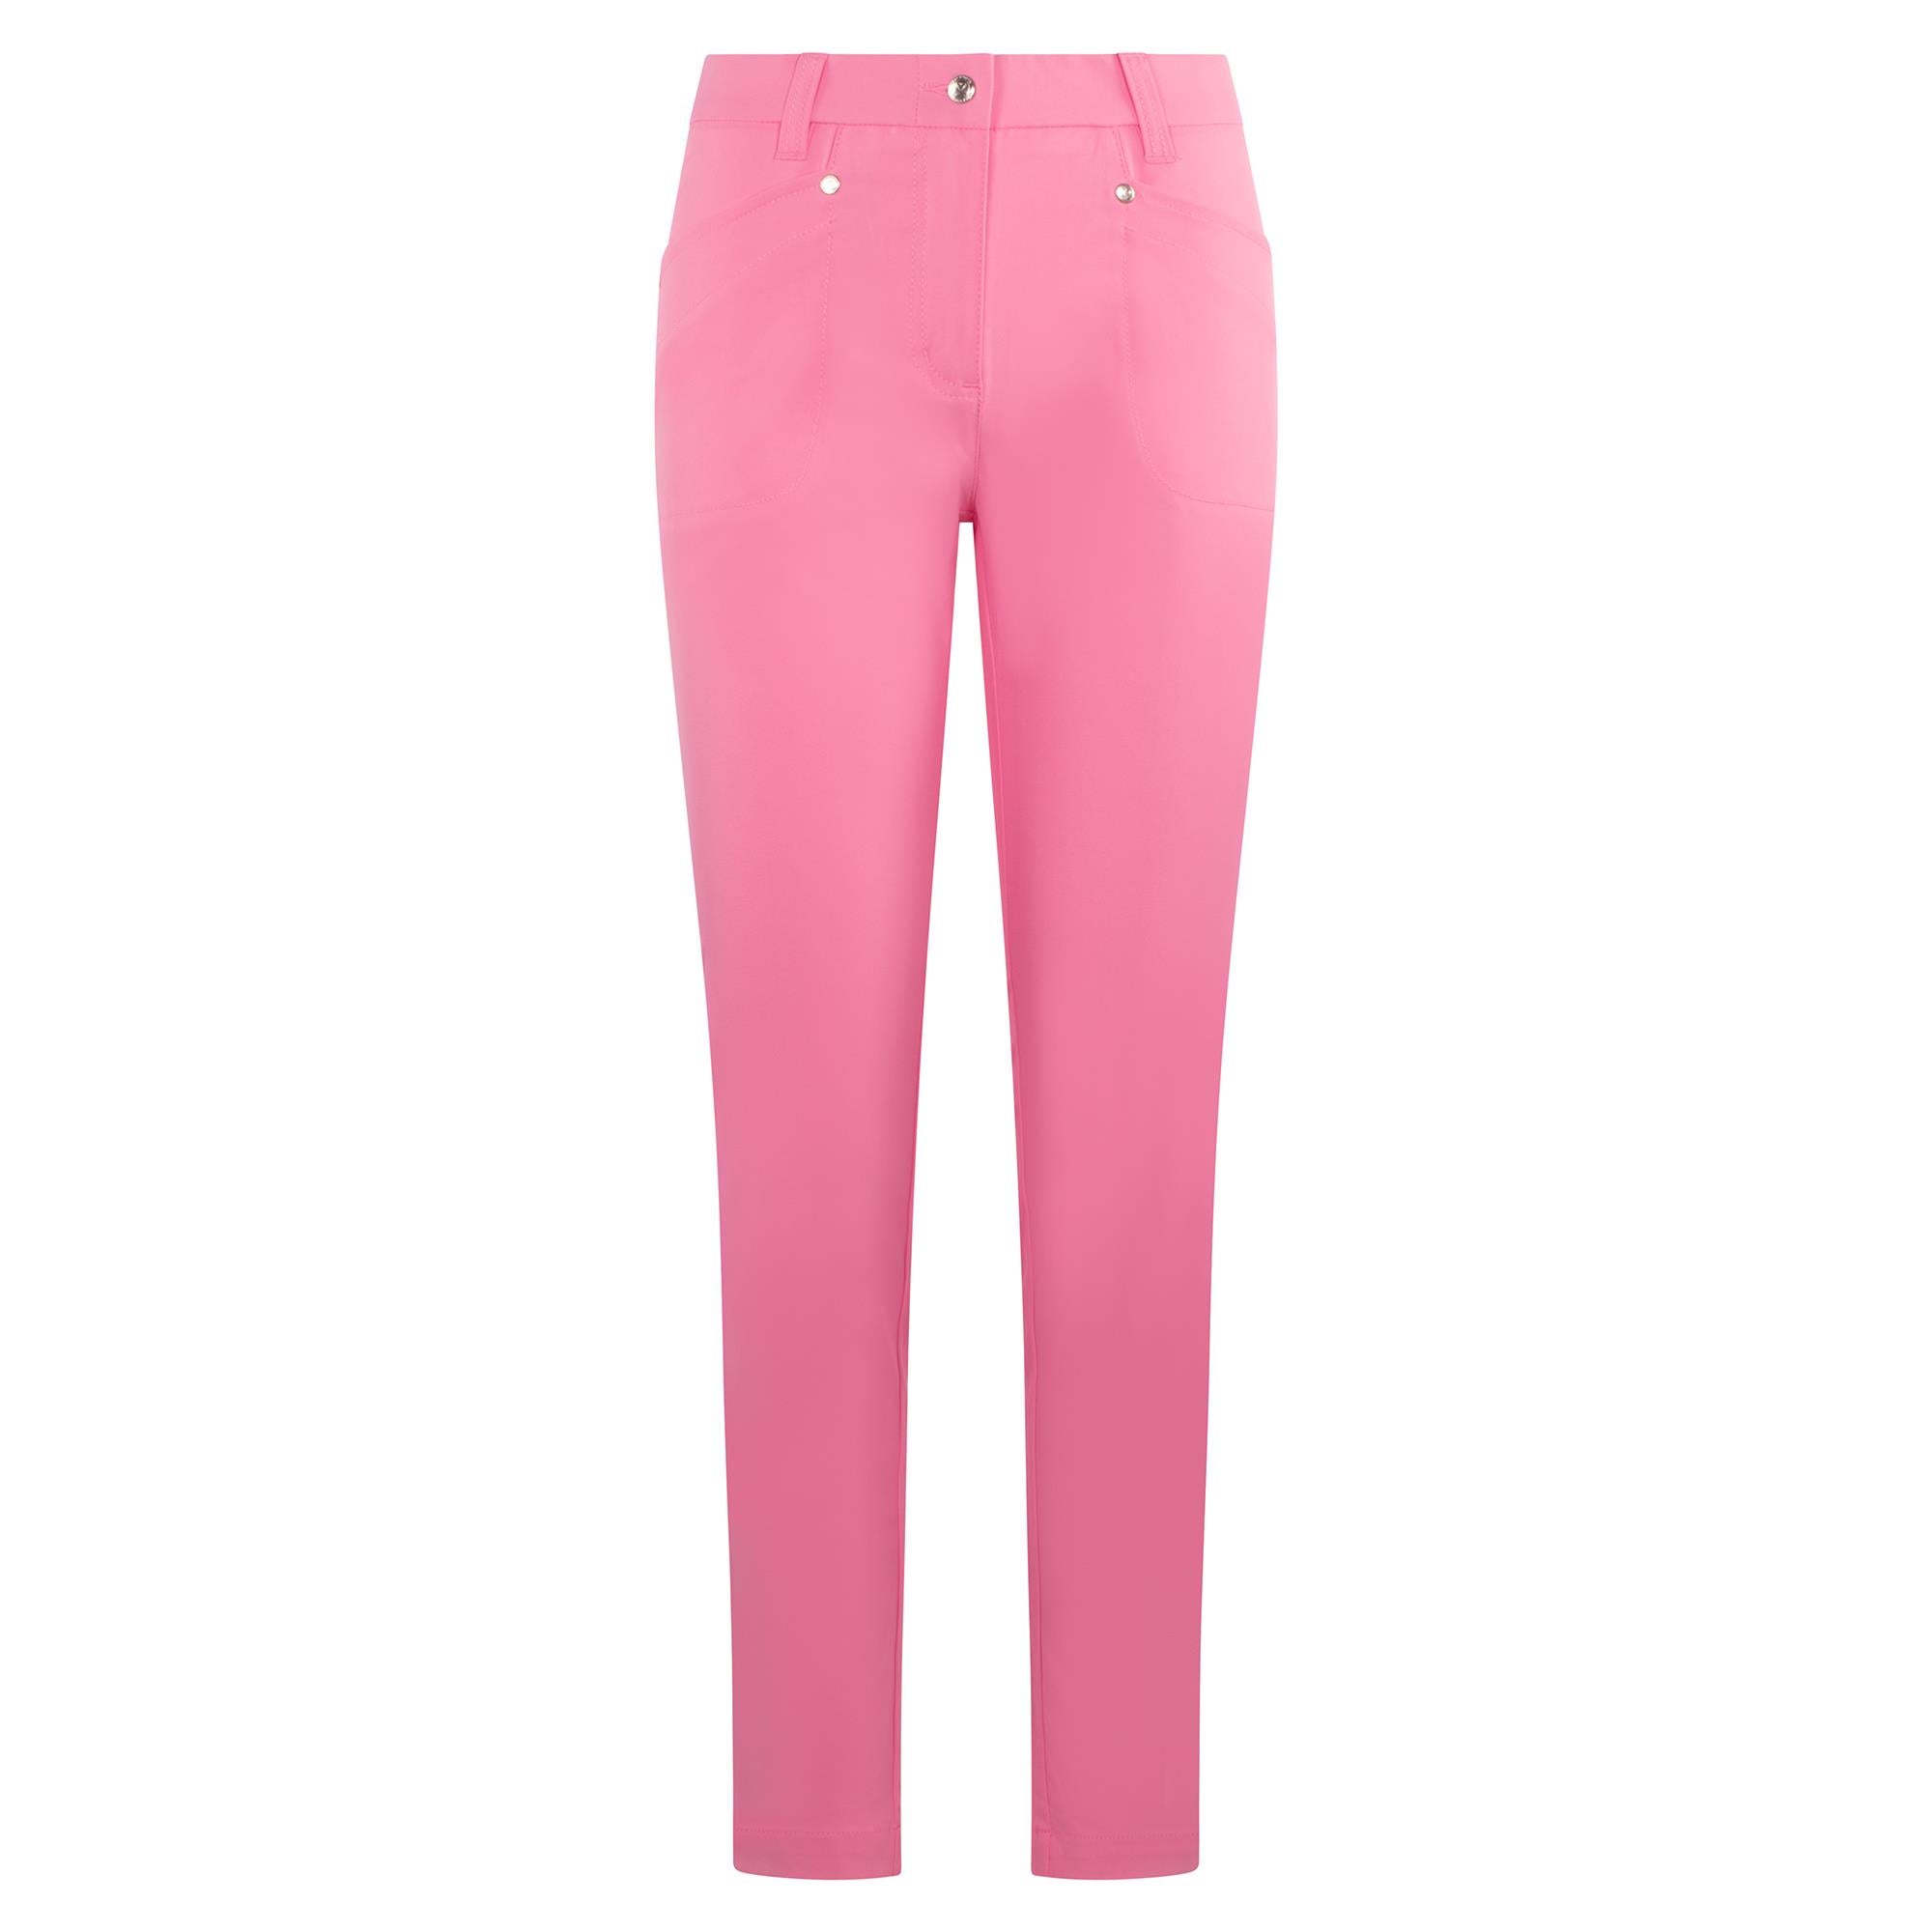 Daily Sports Lyric Ladies Trousers Pink Sky 29 Inch Leg